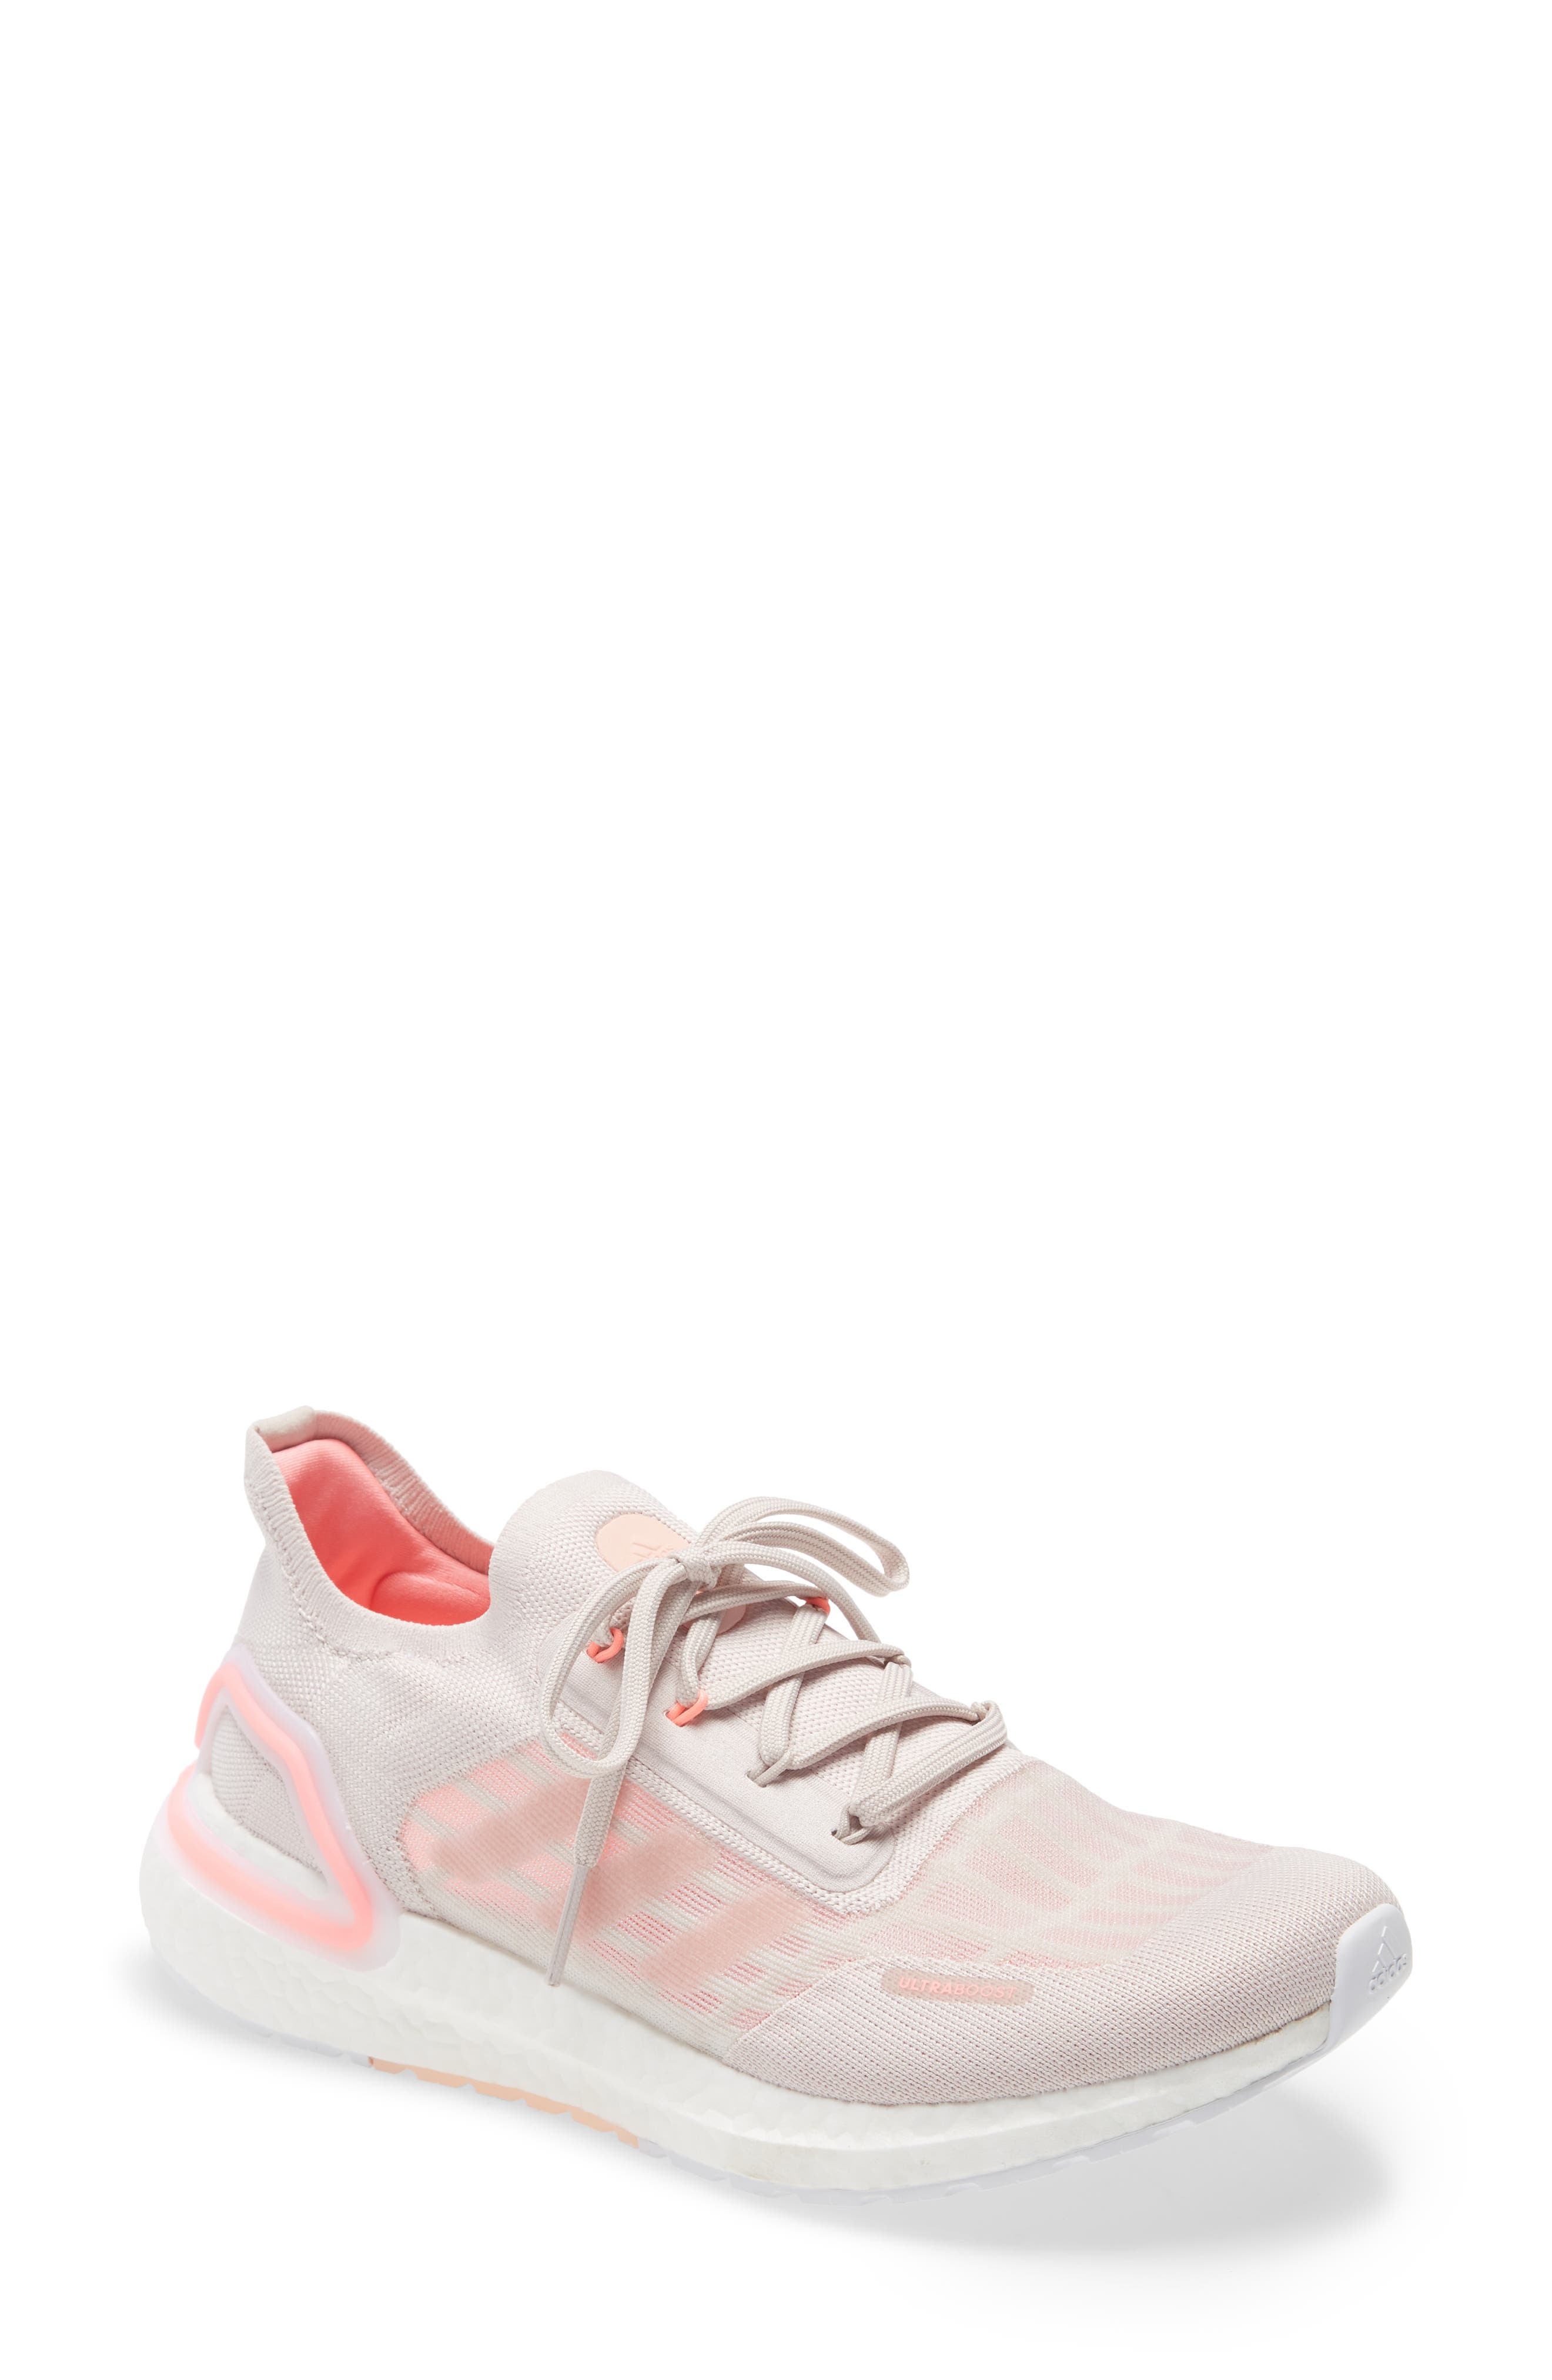 light pink adidas shoes womens